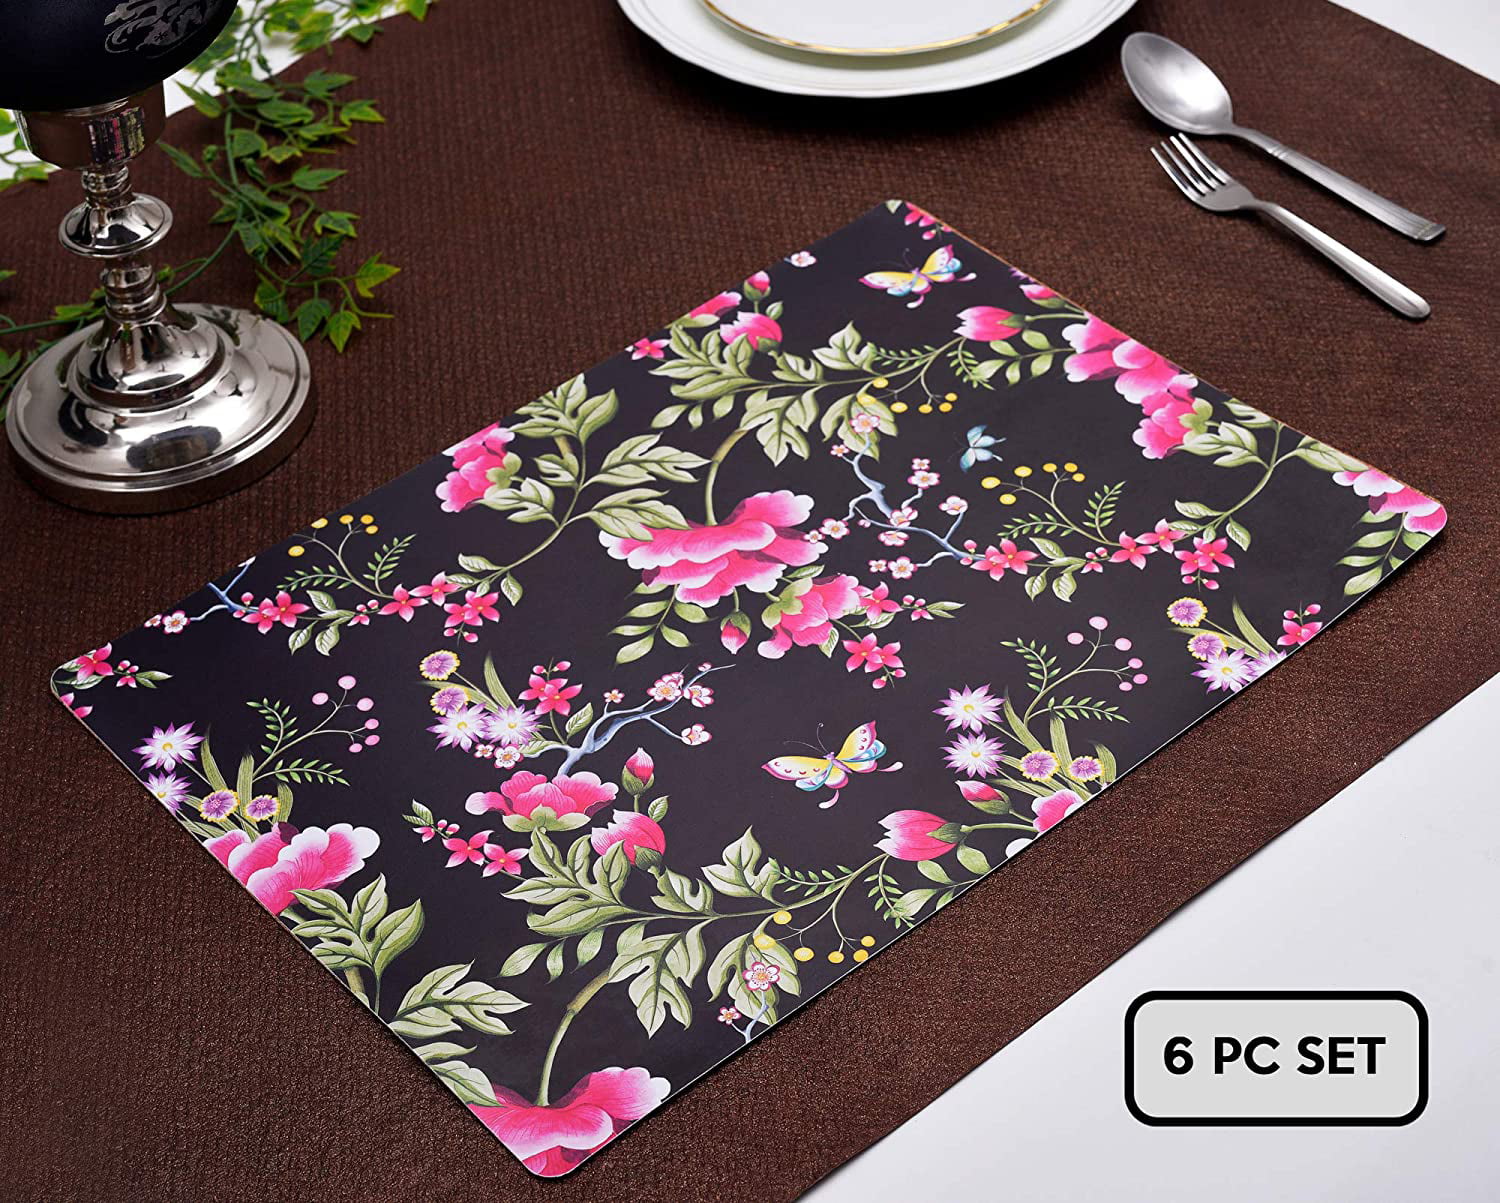 our table kitchen mat